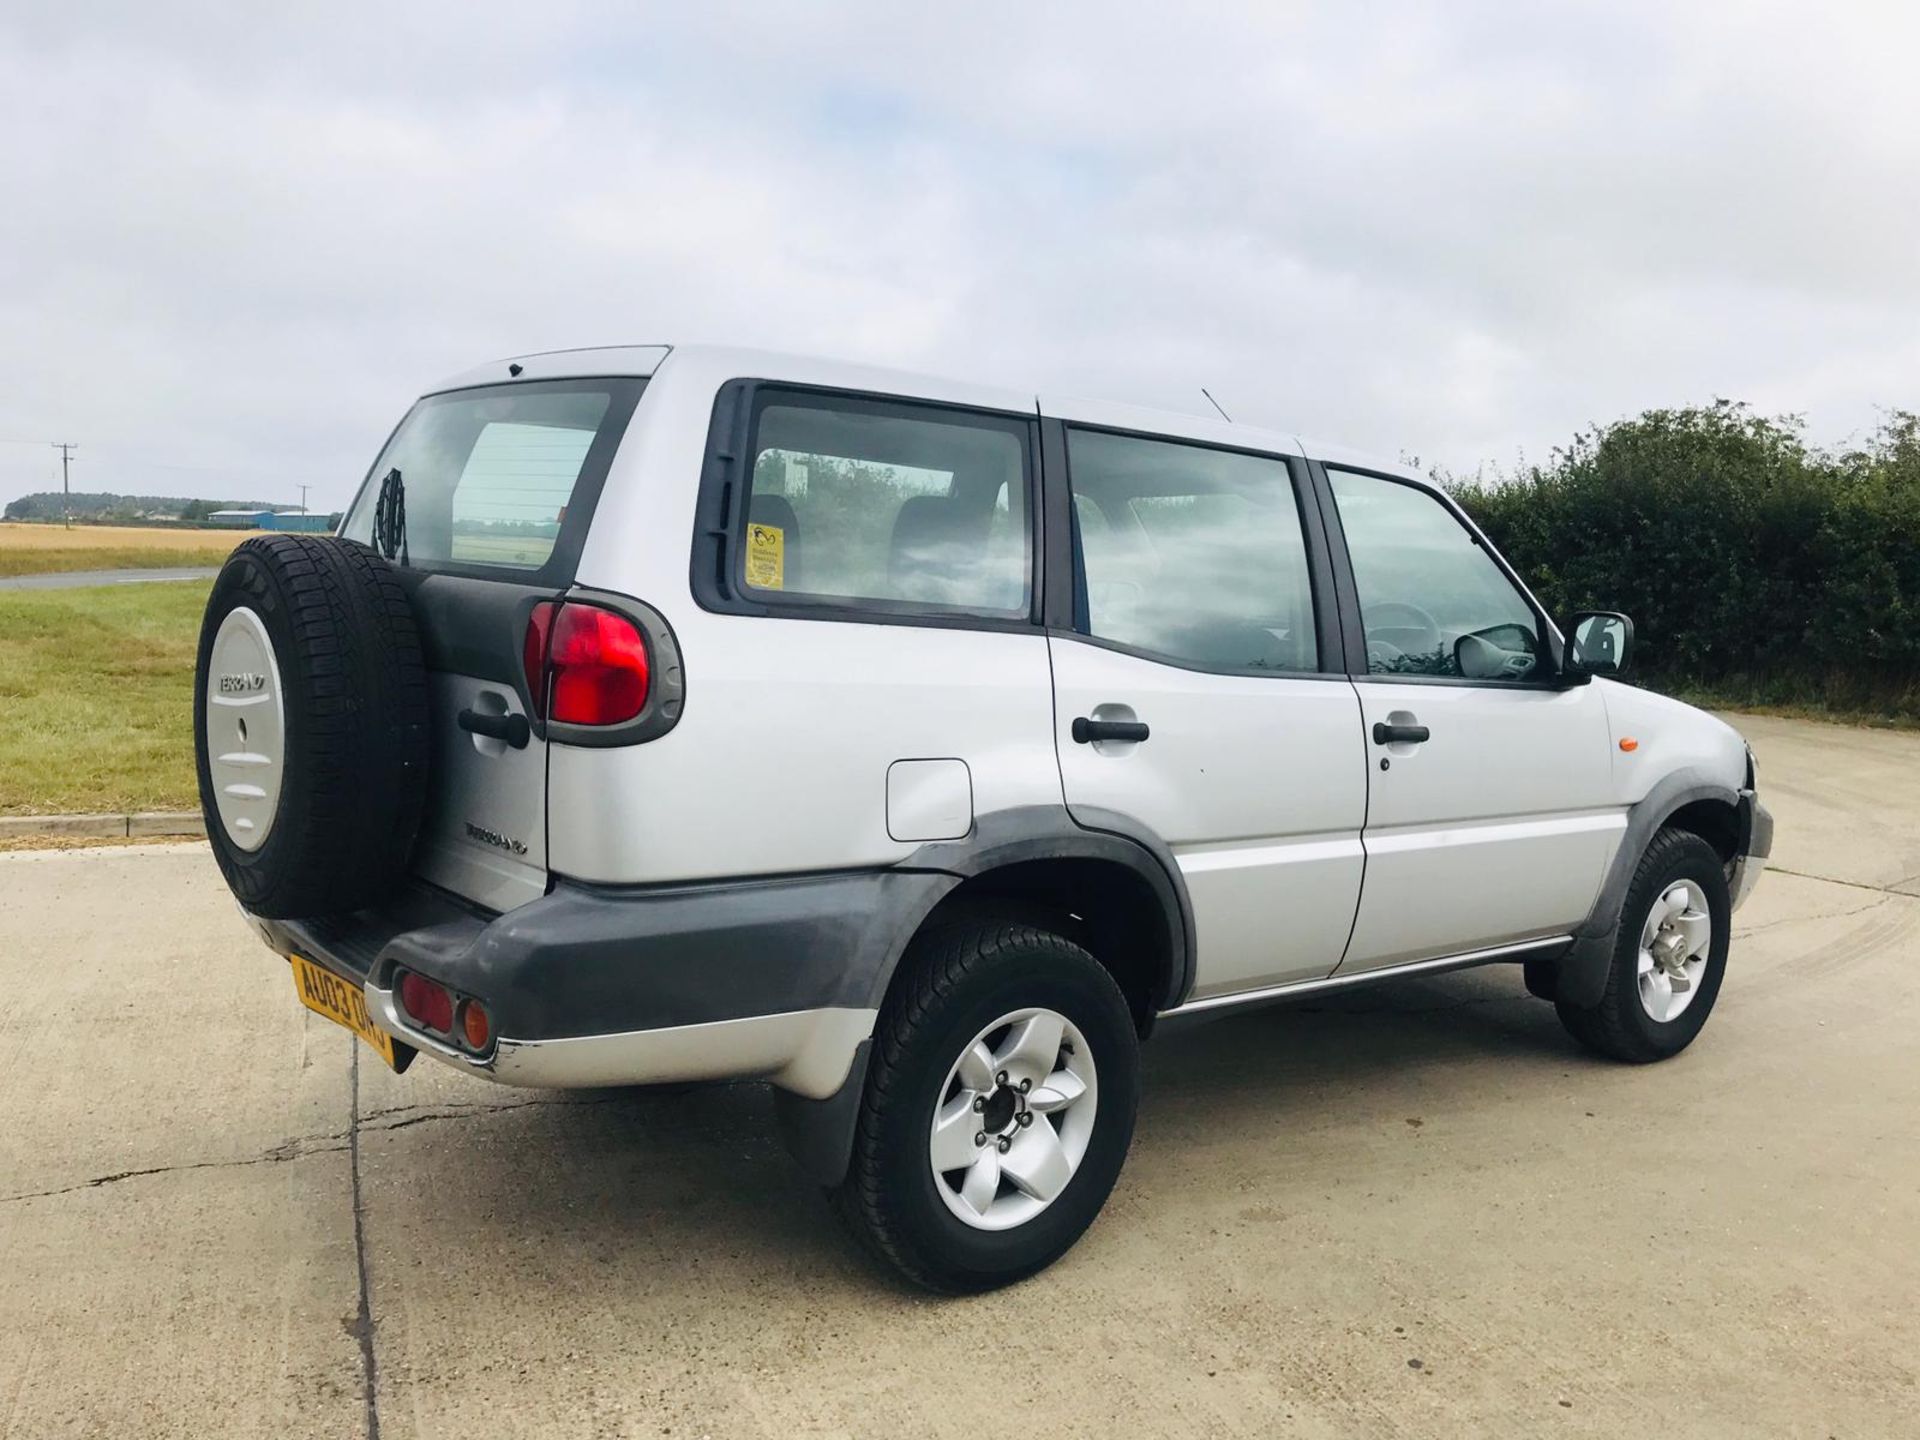 (RESERVE MET) Nissan Torano 2 2.7 (4x4) - 2003 03 Reg - 7 Seats - 1 Owner From New - ONLY 73k Miles - Image 3 of 21